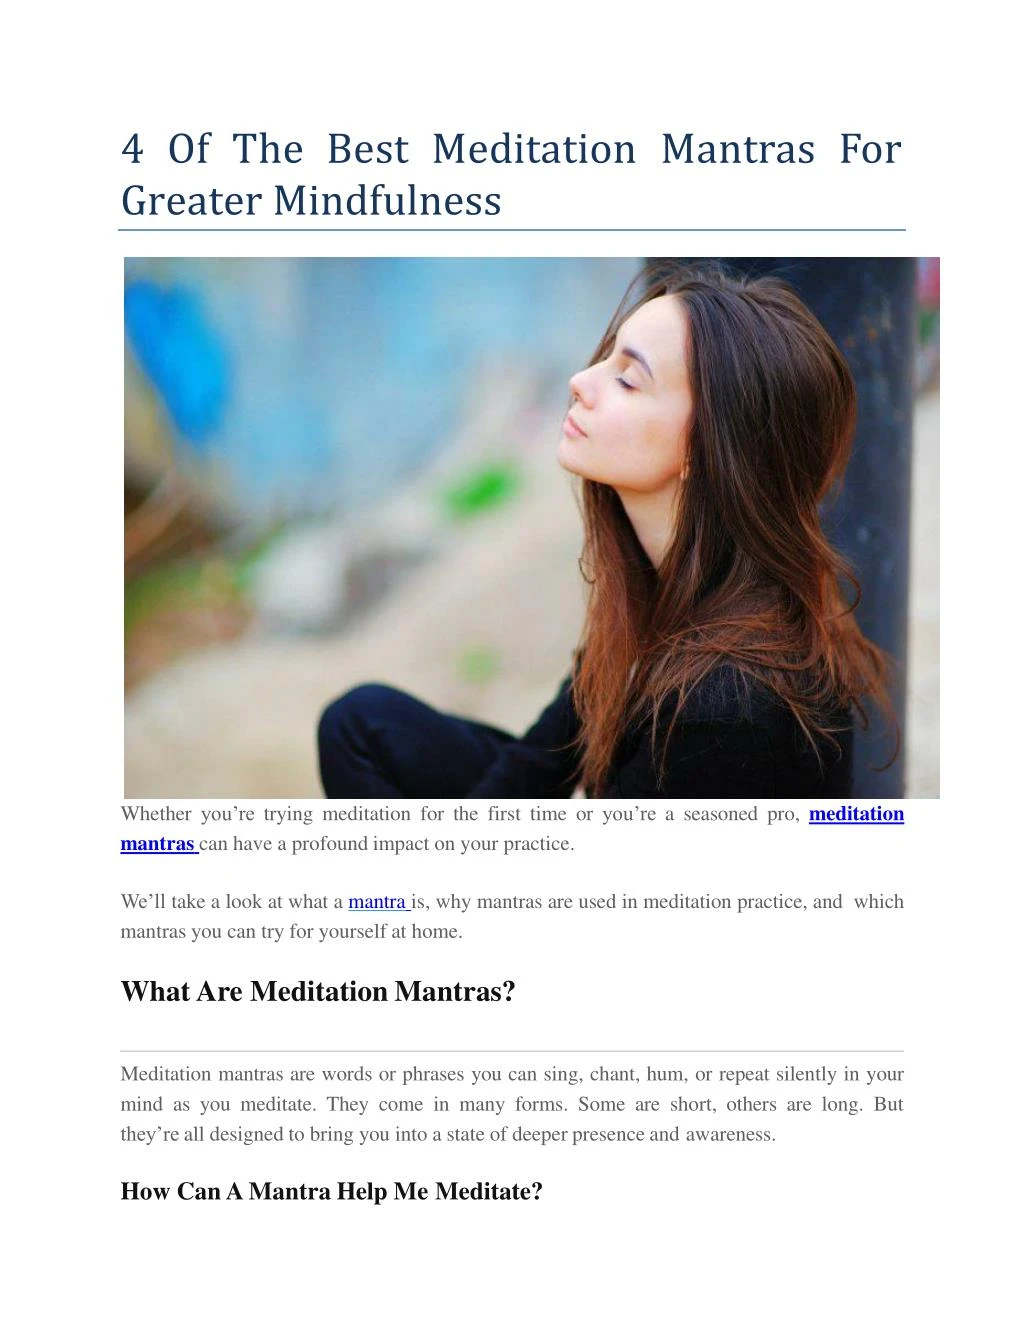 4 o f t h e b e s t me dit a t io n man t r a s f o r greater mindfulness